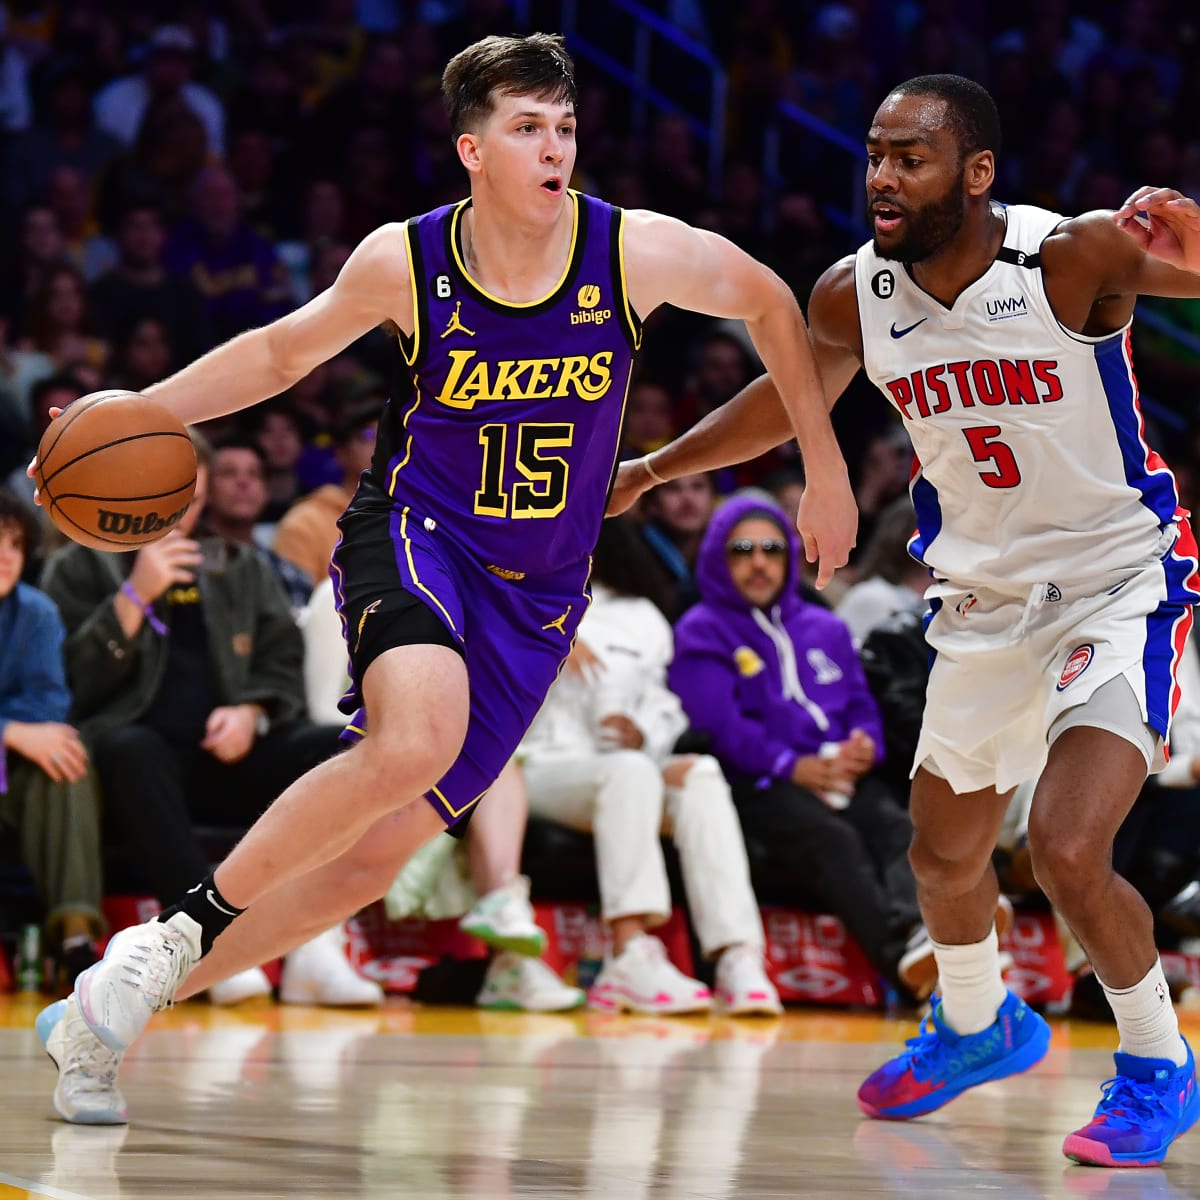 Lakers blow out Pistons behind balanced scoring, sizzling shooting